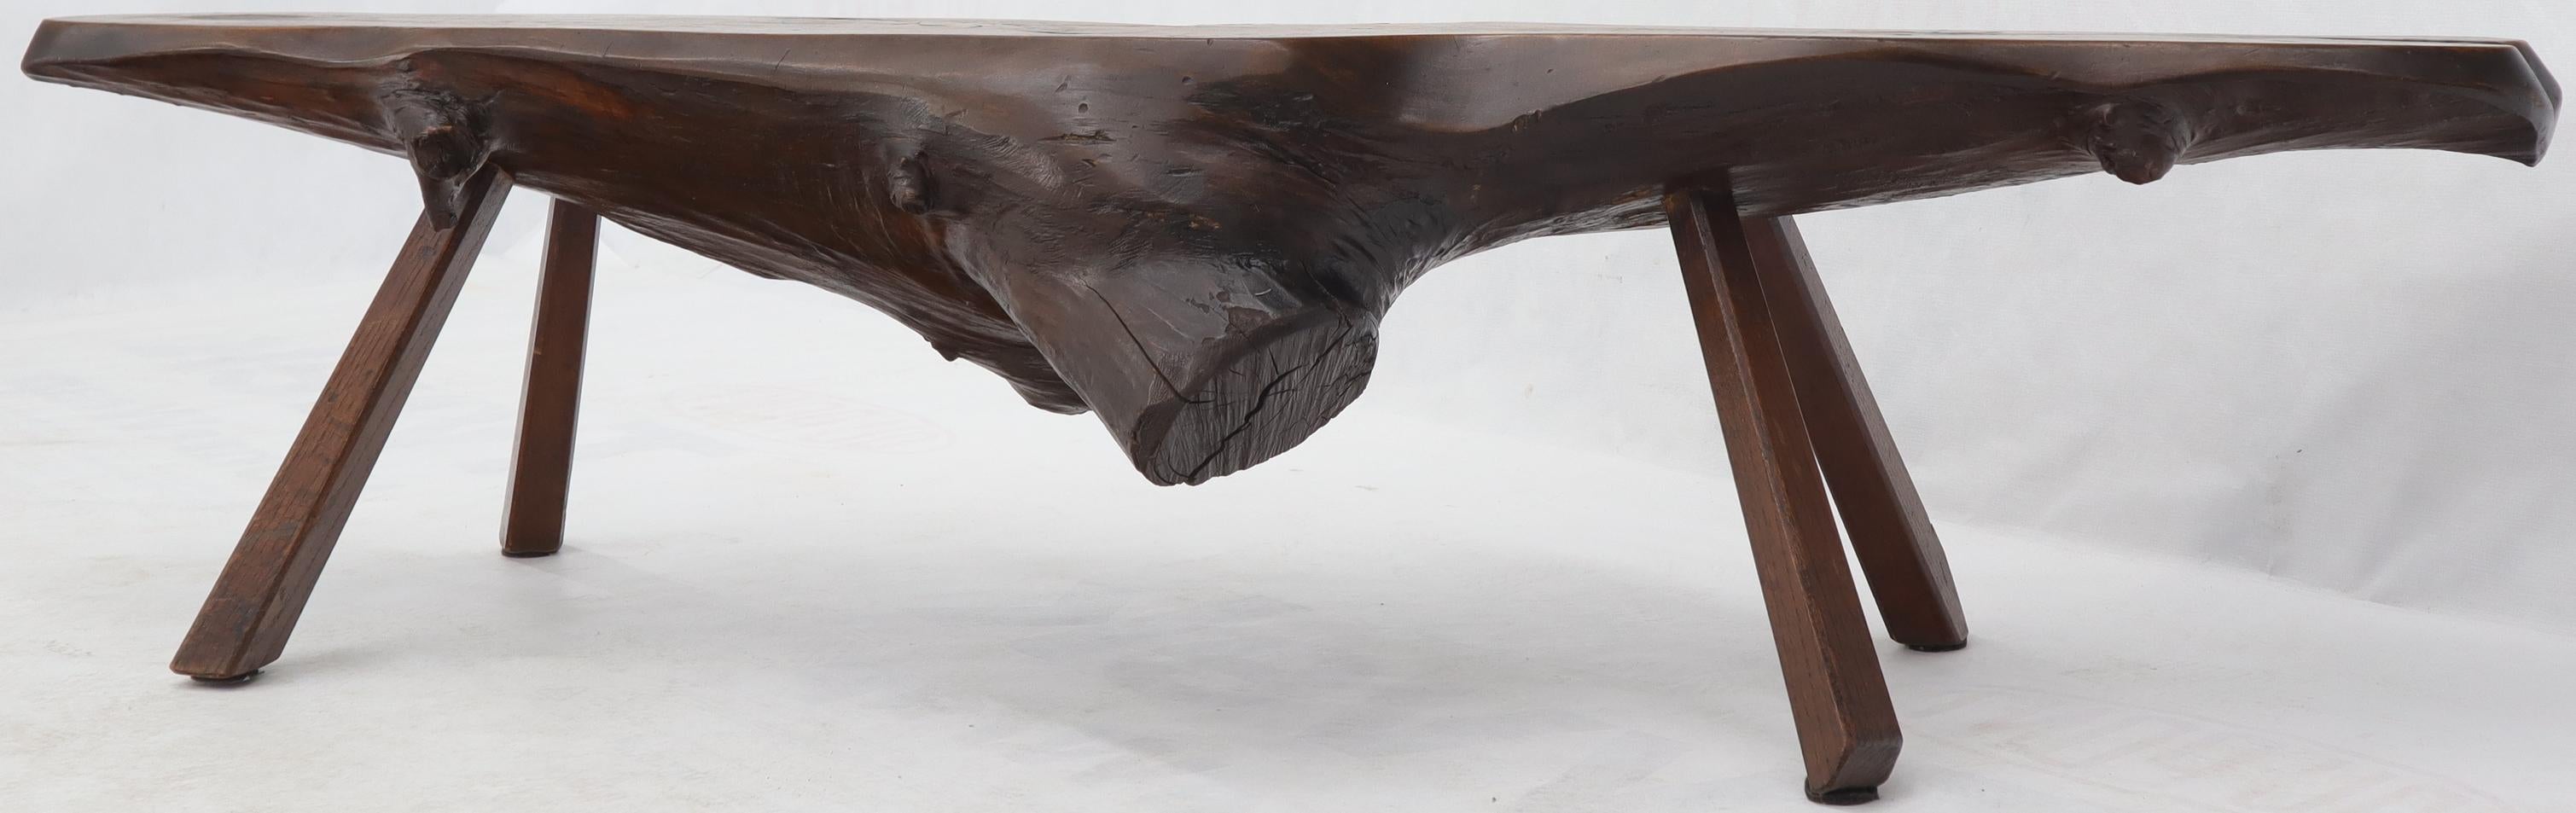 American Organic Heavy Solid Walnut Varnished Slab Top Coffee Table on Tapered Legs For Sale